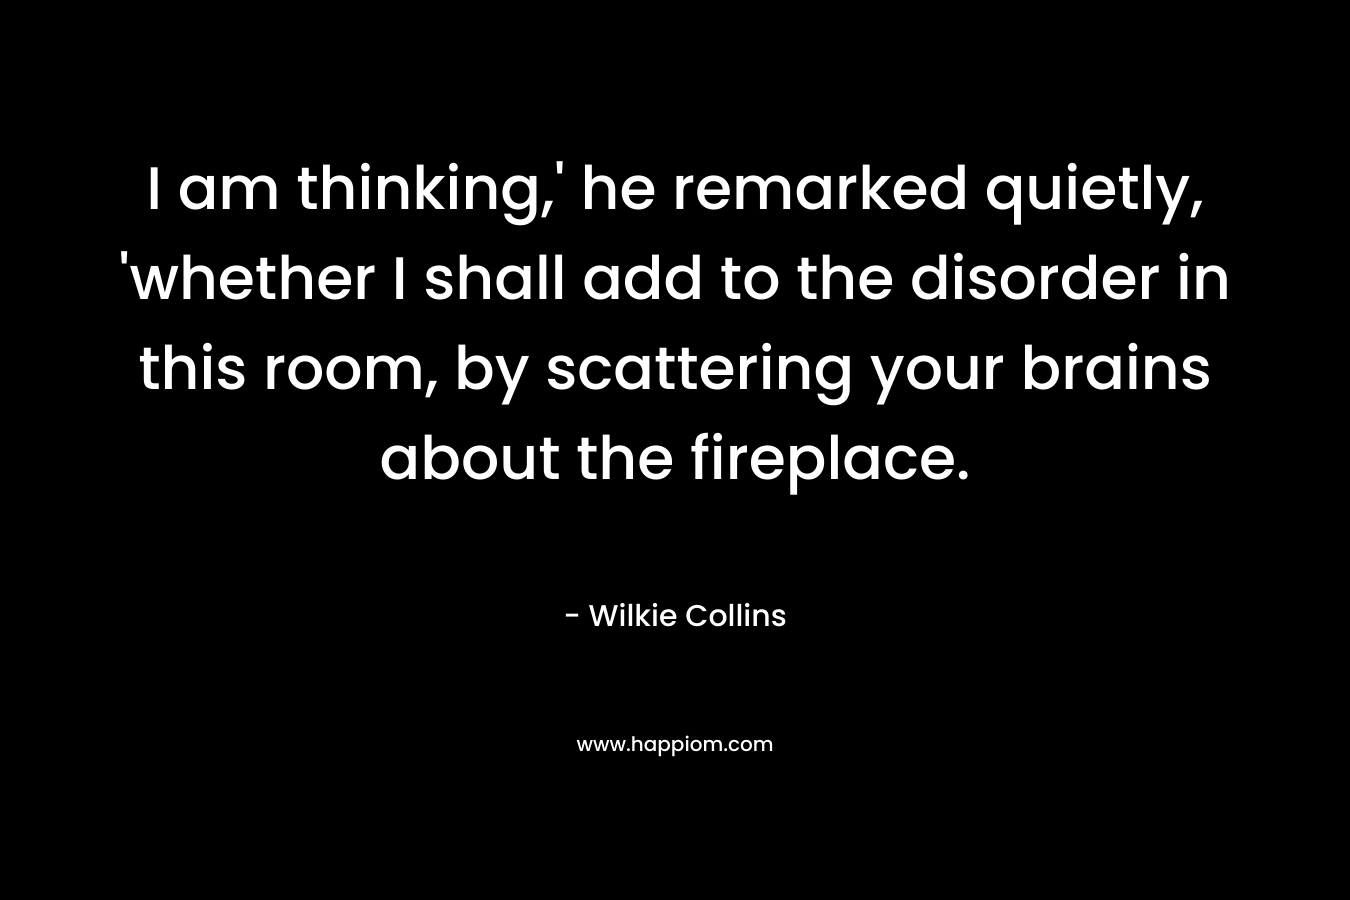 I am thinking,’ he remarked quietly, ‘whether I shall add to the disorder in this room, by scattering your brains about the fireplace. – Wilkie Collins